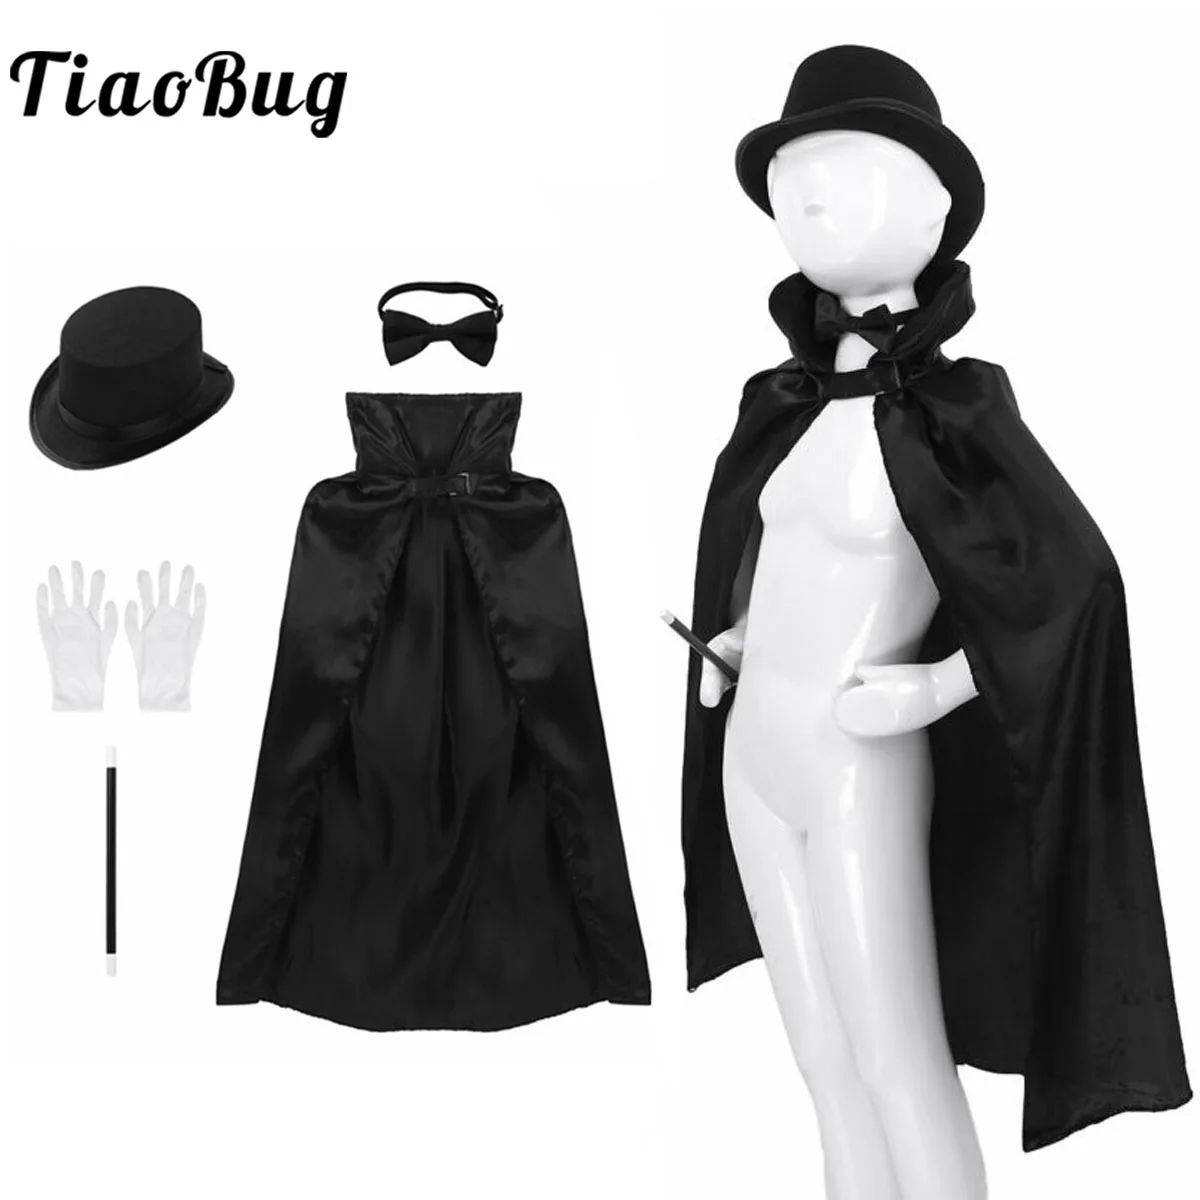 Kids Magician Role Play Costumes Outfit Boys Girls Halloween Magician Dress Up Cosplay Set  Top Hat Magic Cape Wand Gloves Kit